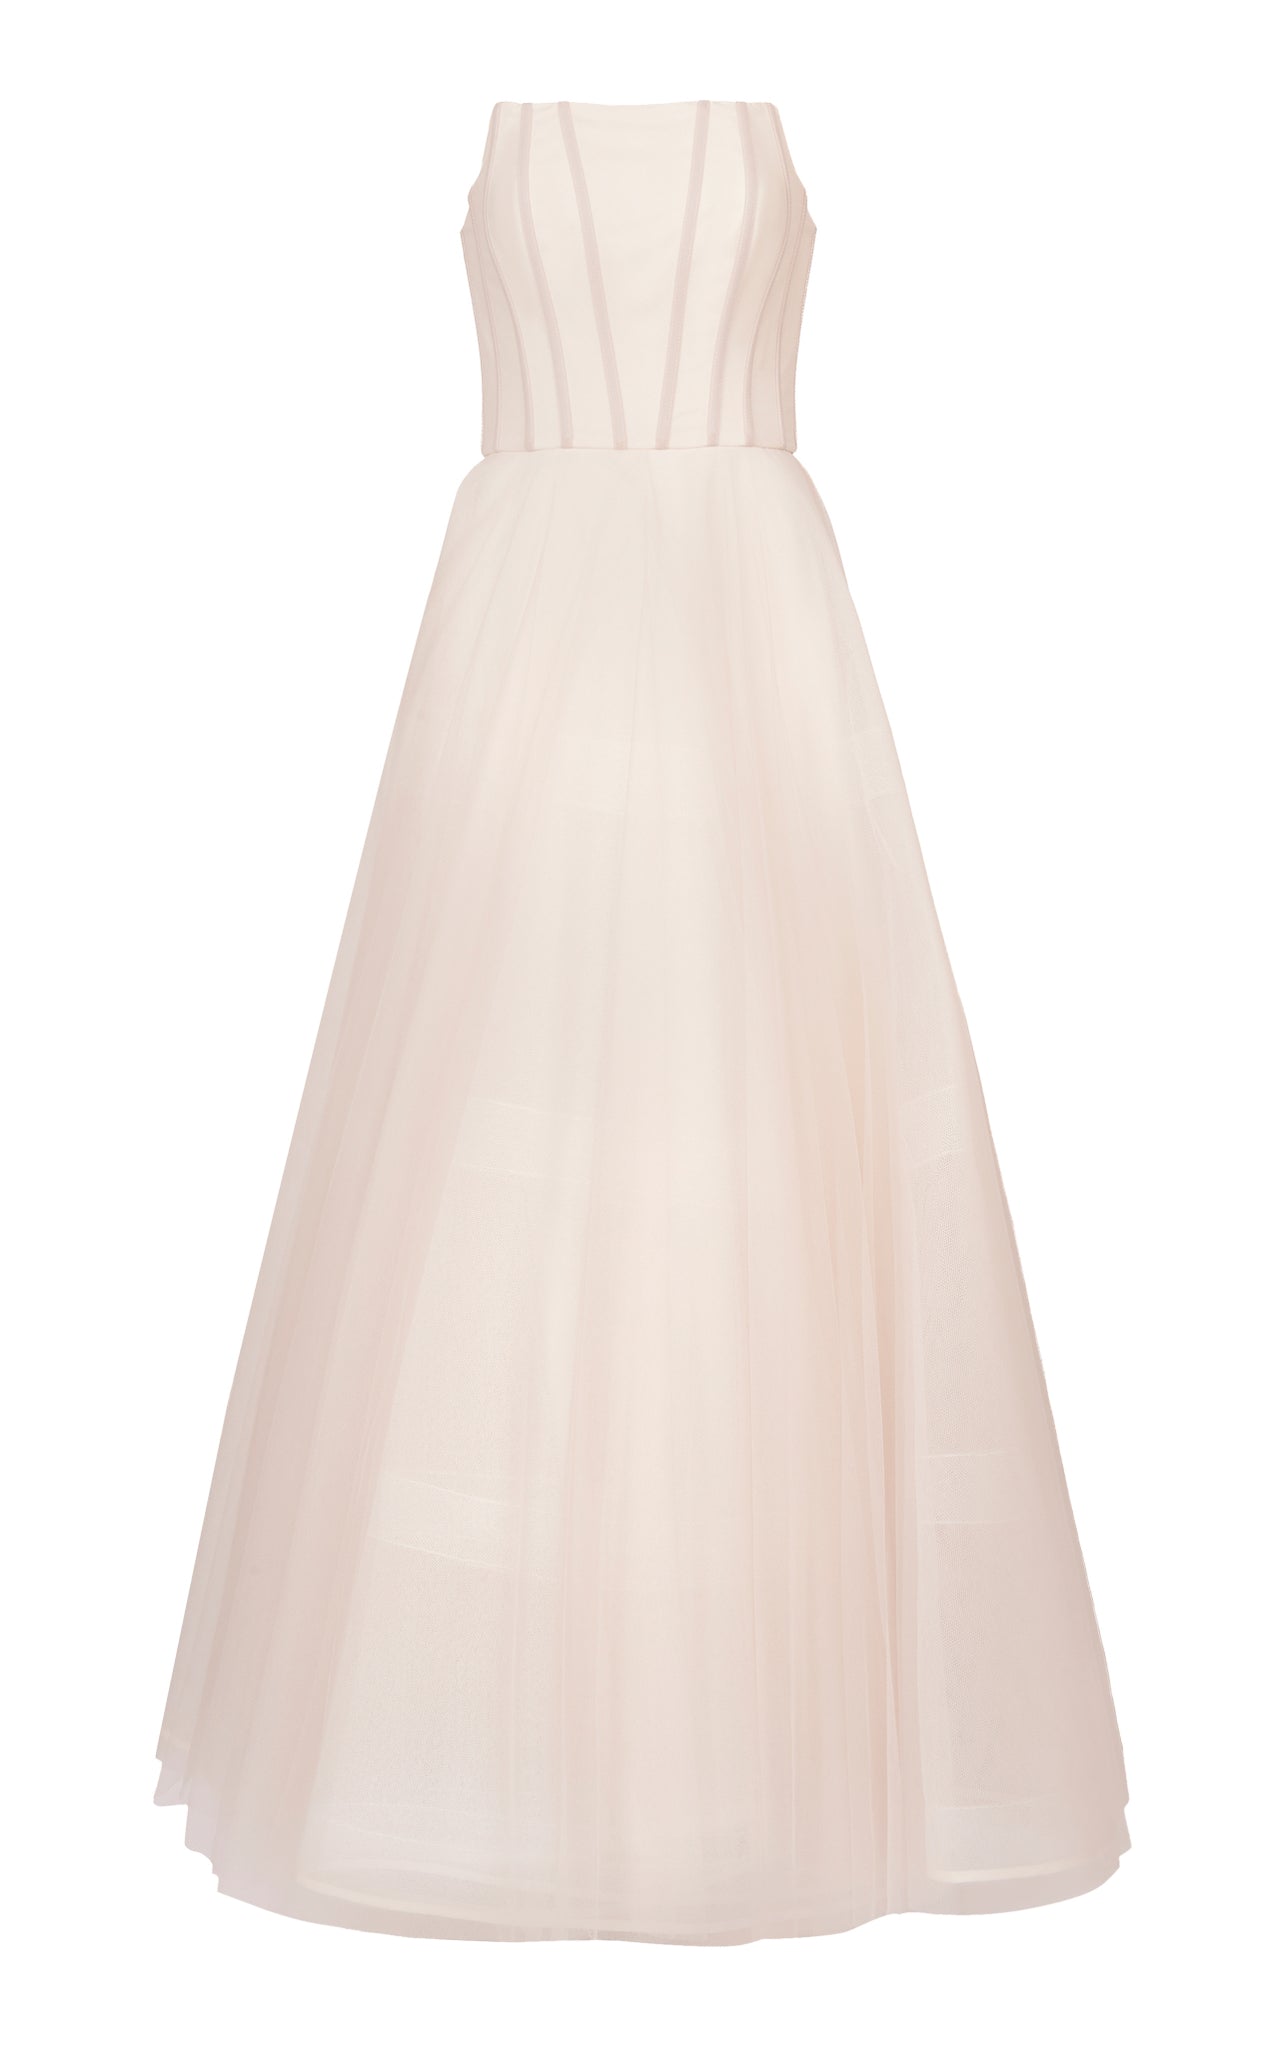 Strapless Tulle Ballgown with Ruched Gloves